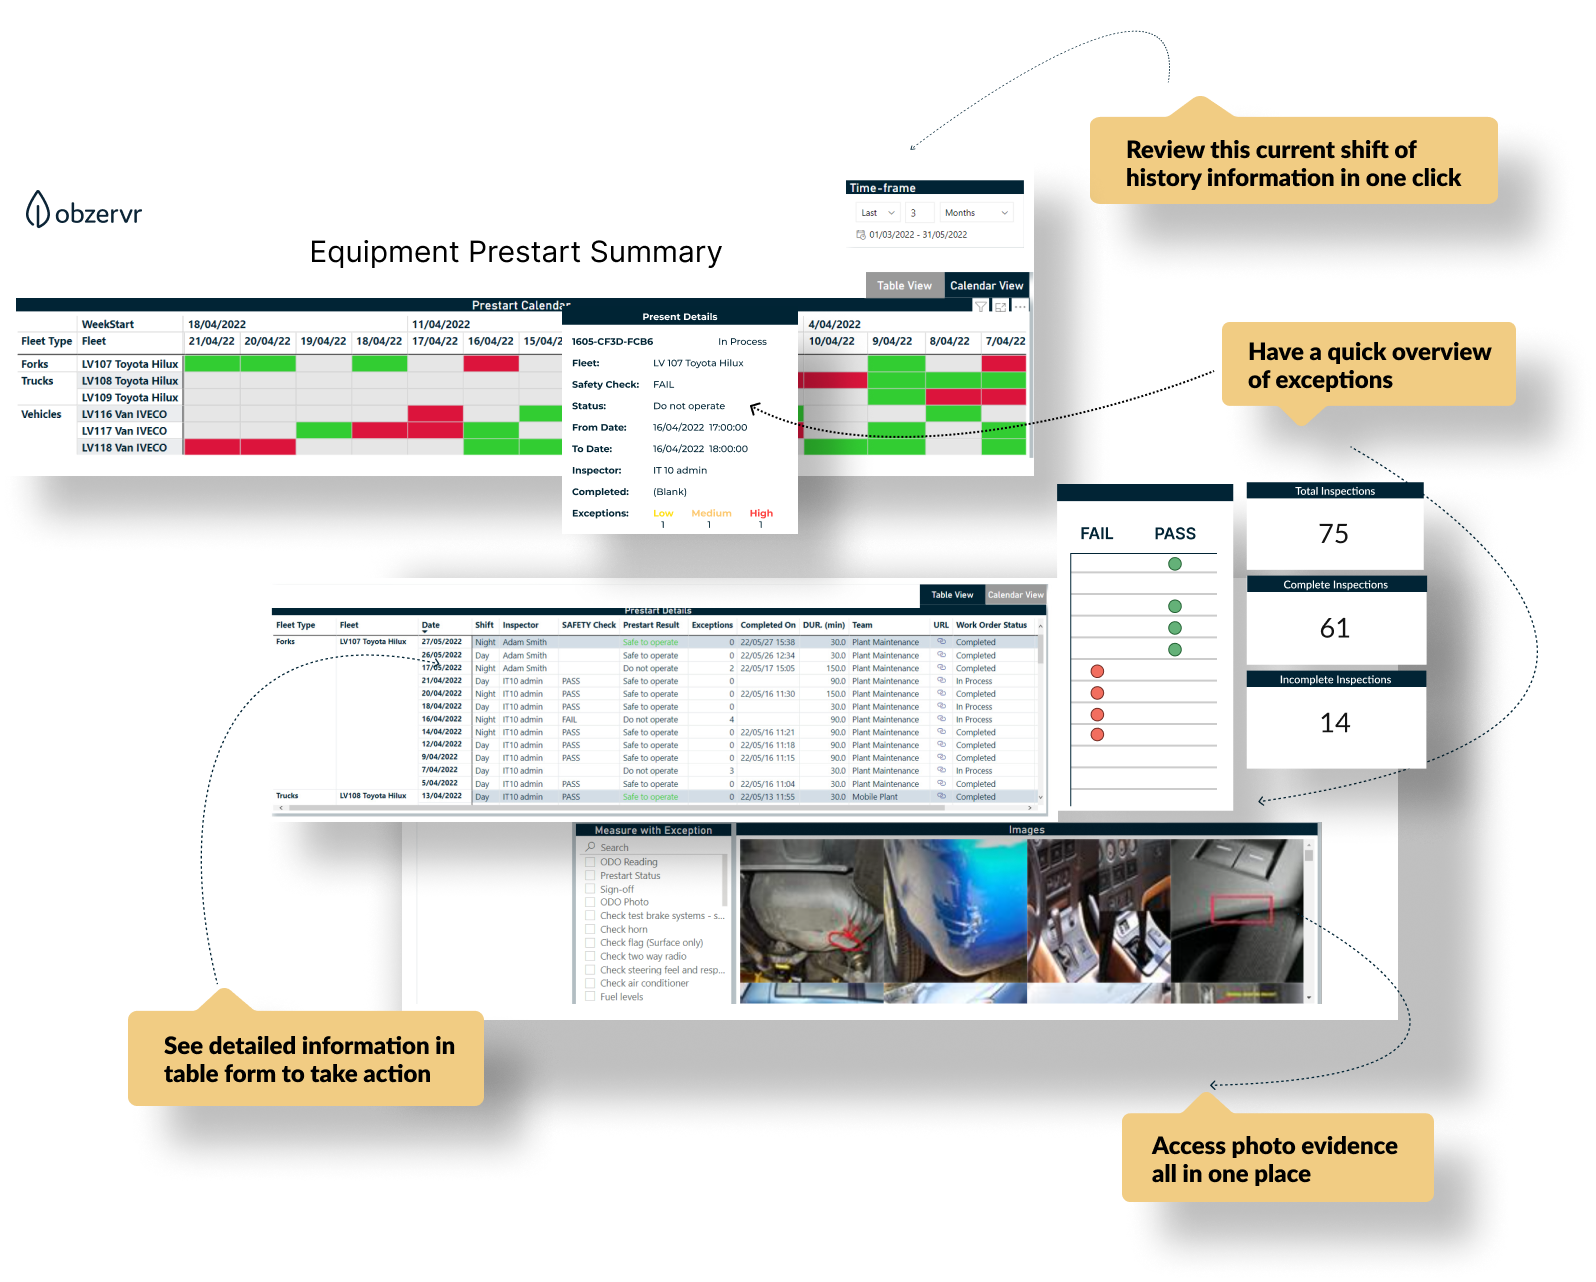 Customized dashboards for exception management and more